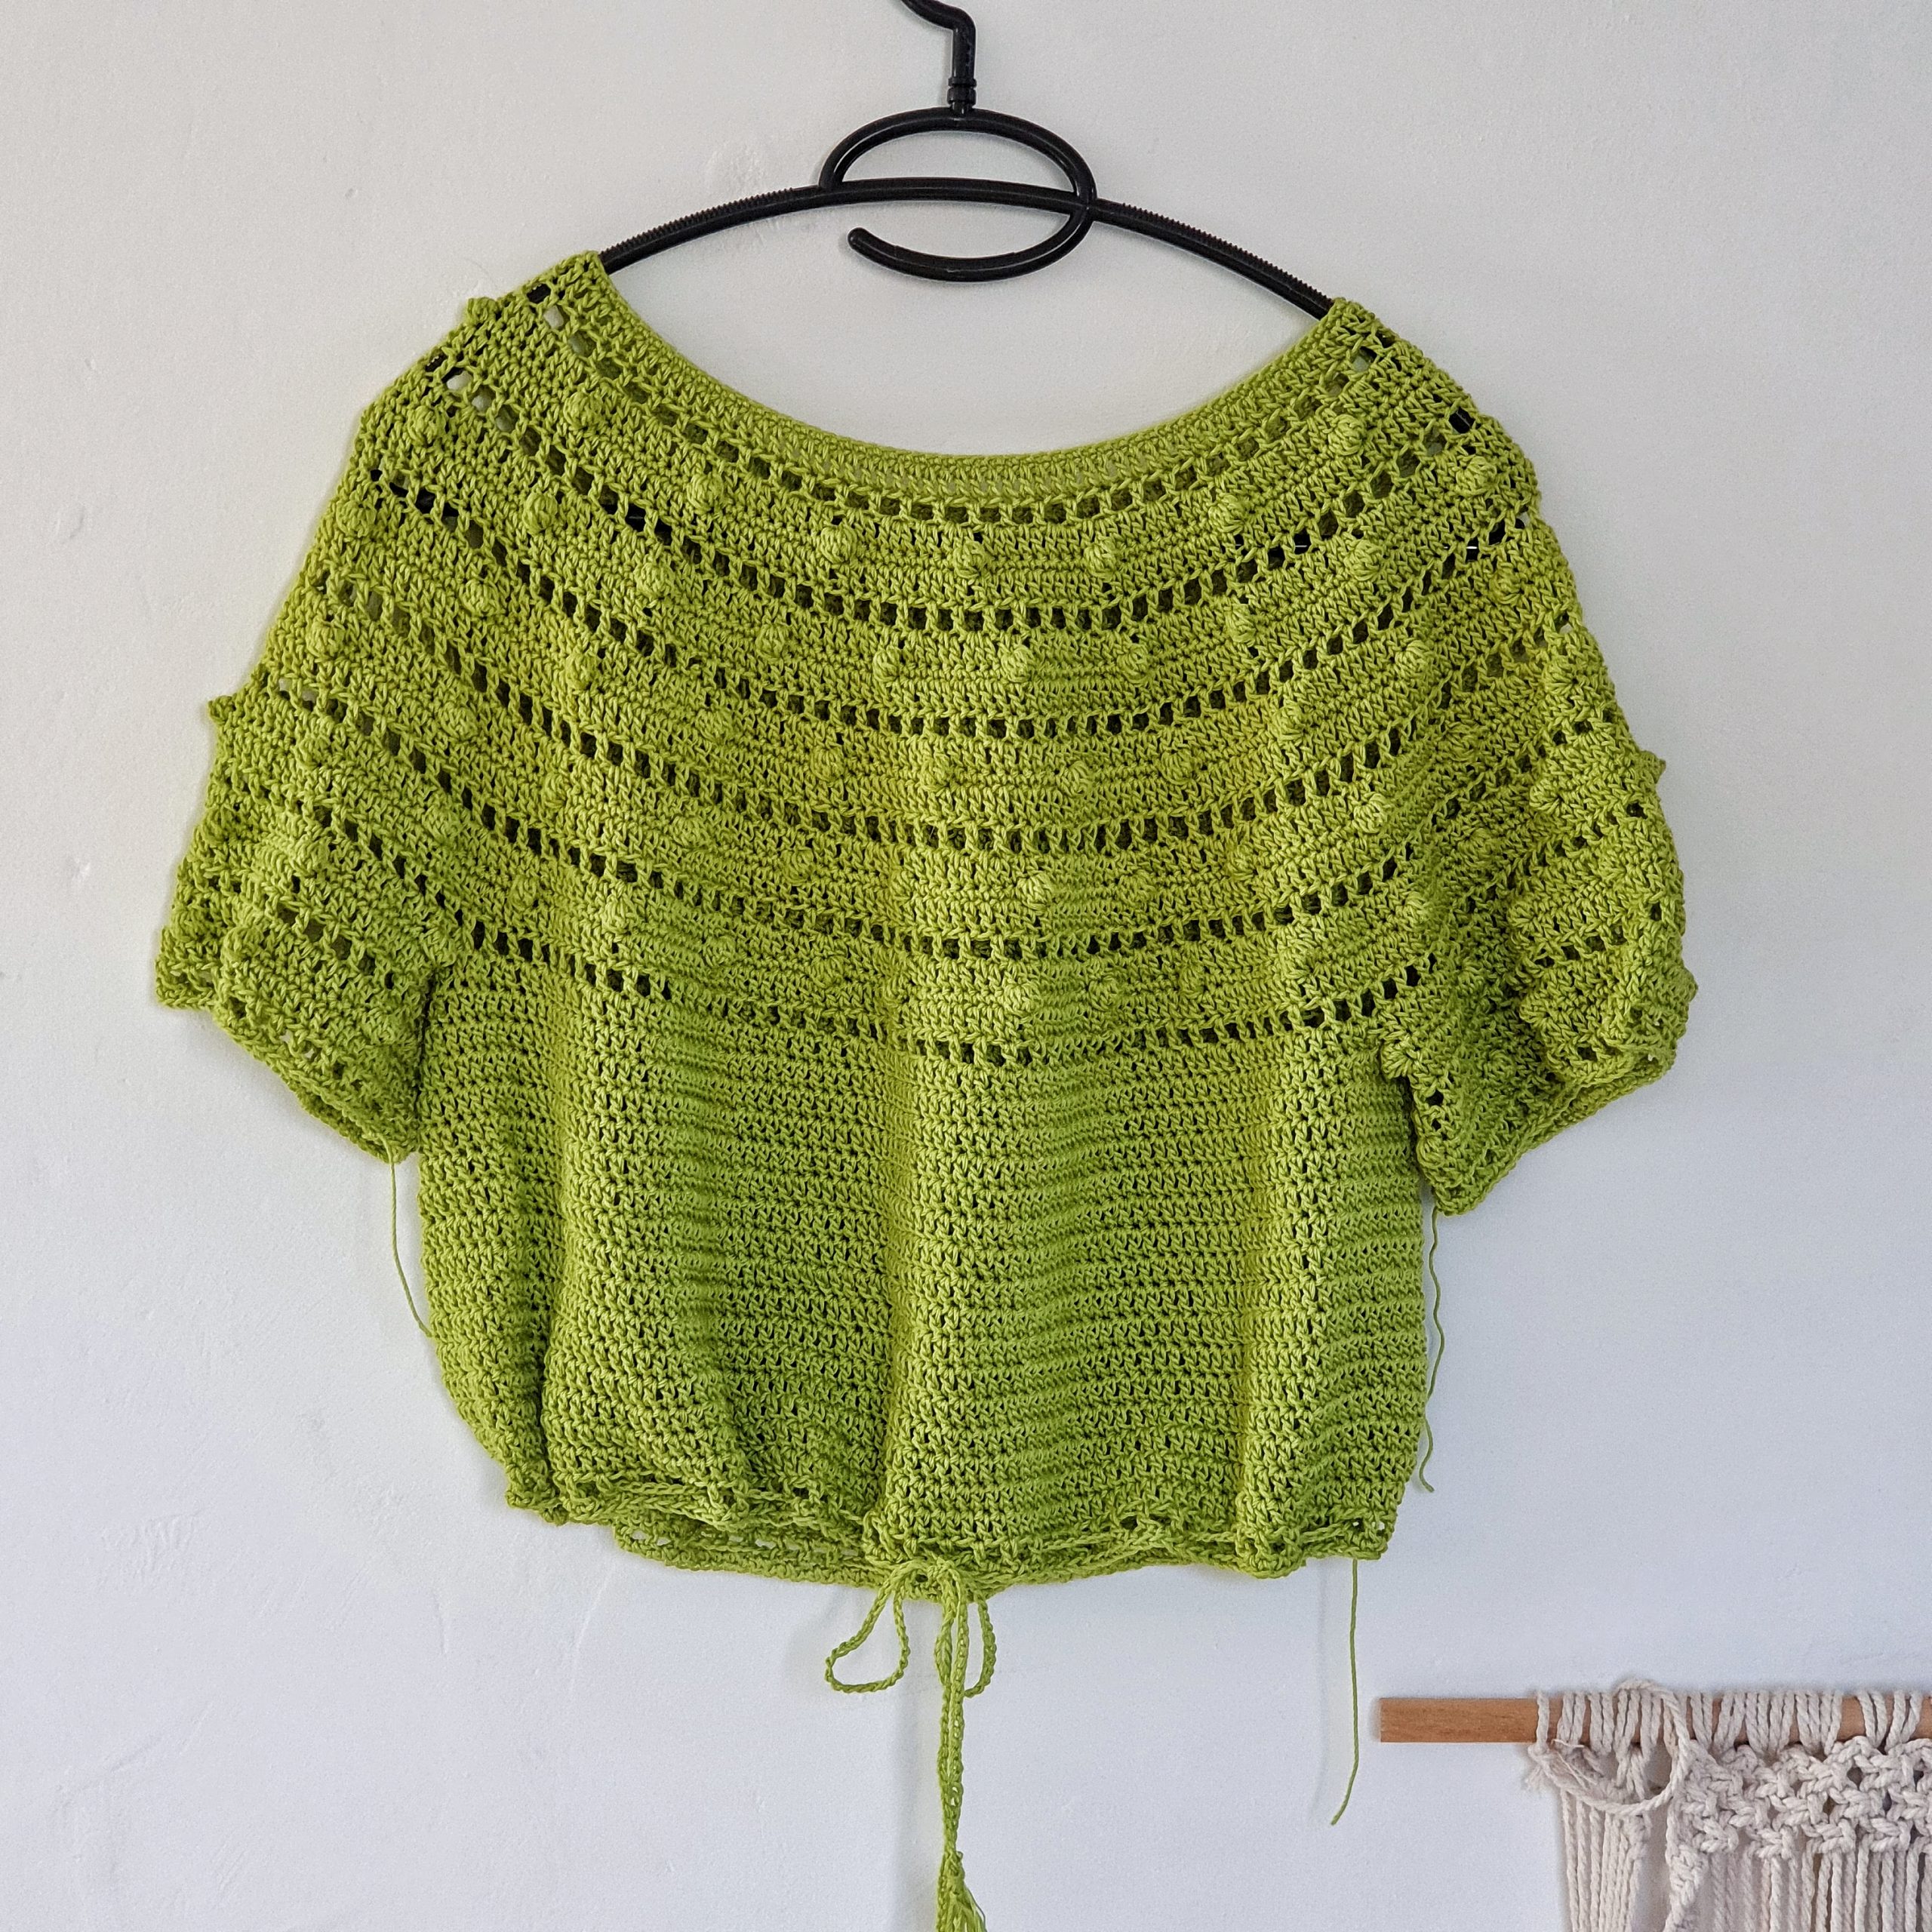 Knit and Crochet Yokes for Tops, Dresses – 11 free patterns